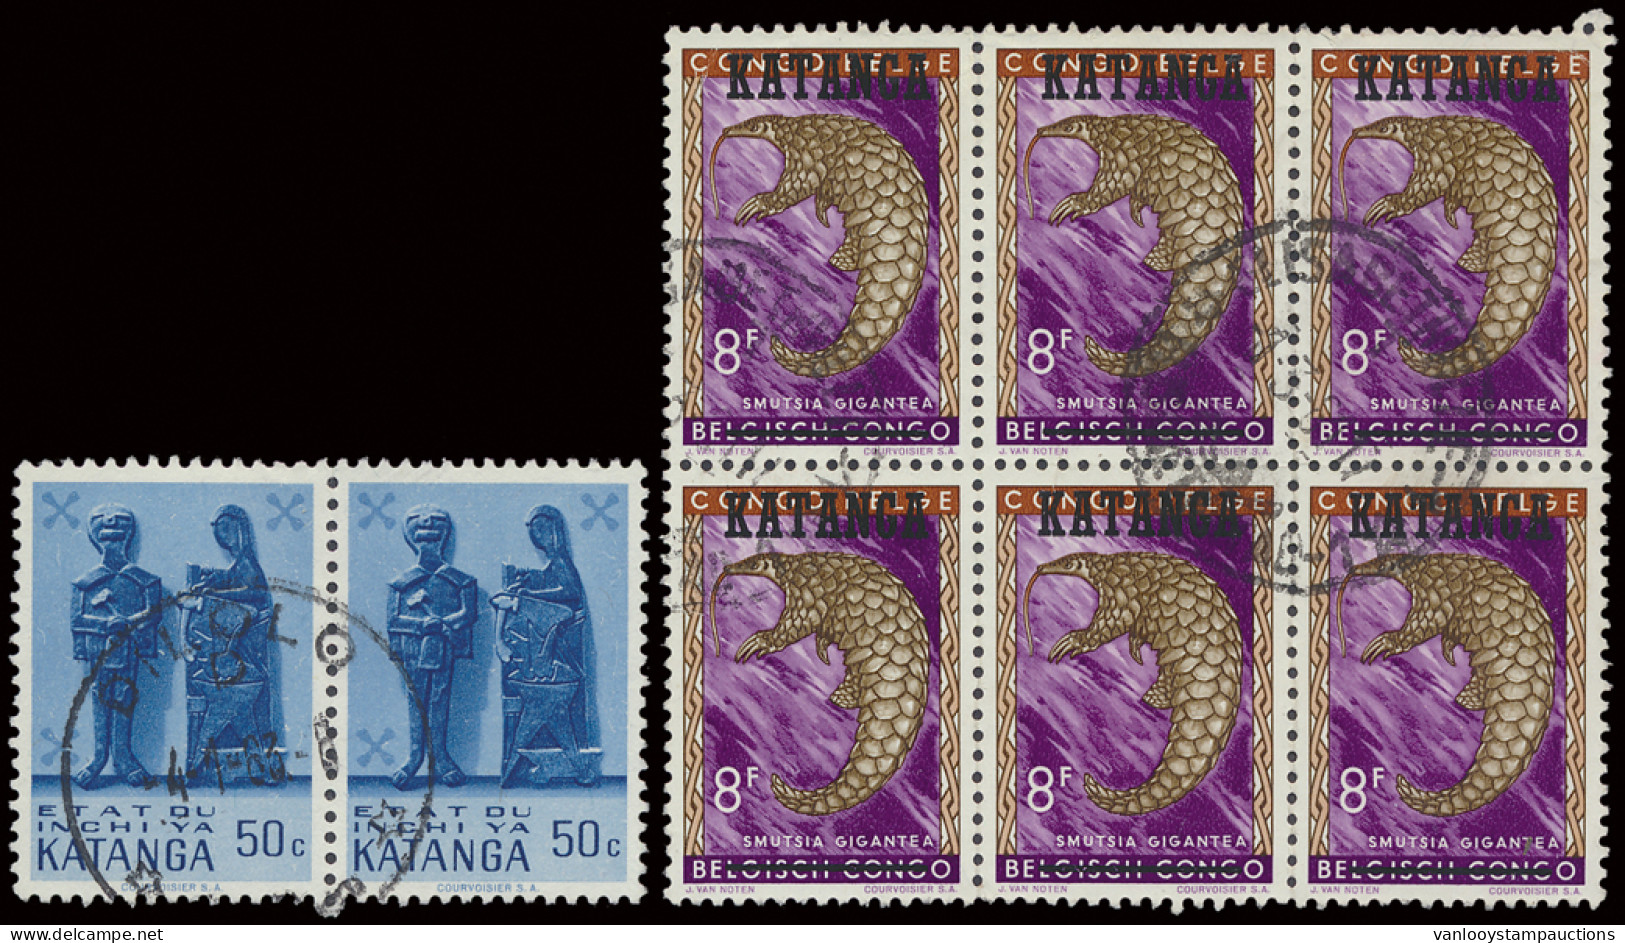 1960/1963, Accumulation Of Blocks And Beautiful Cancellations Such As Elisabethville 1/A, Dilolo - D, Albertville, On 61 - Katanga